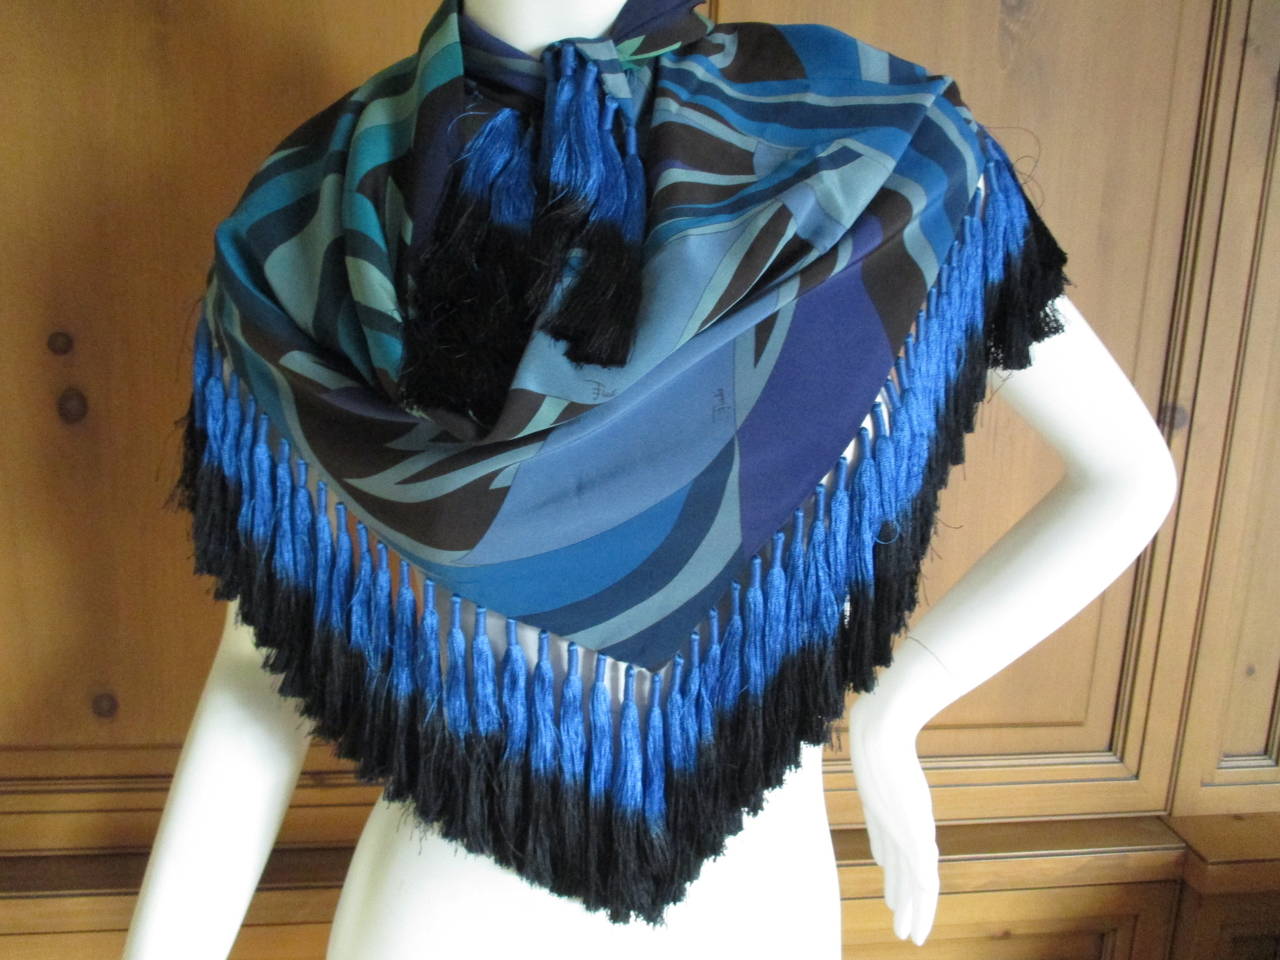 Pucci Silk Shawl with Ombre Fringe
This is so beautiful, can be styled many ways